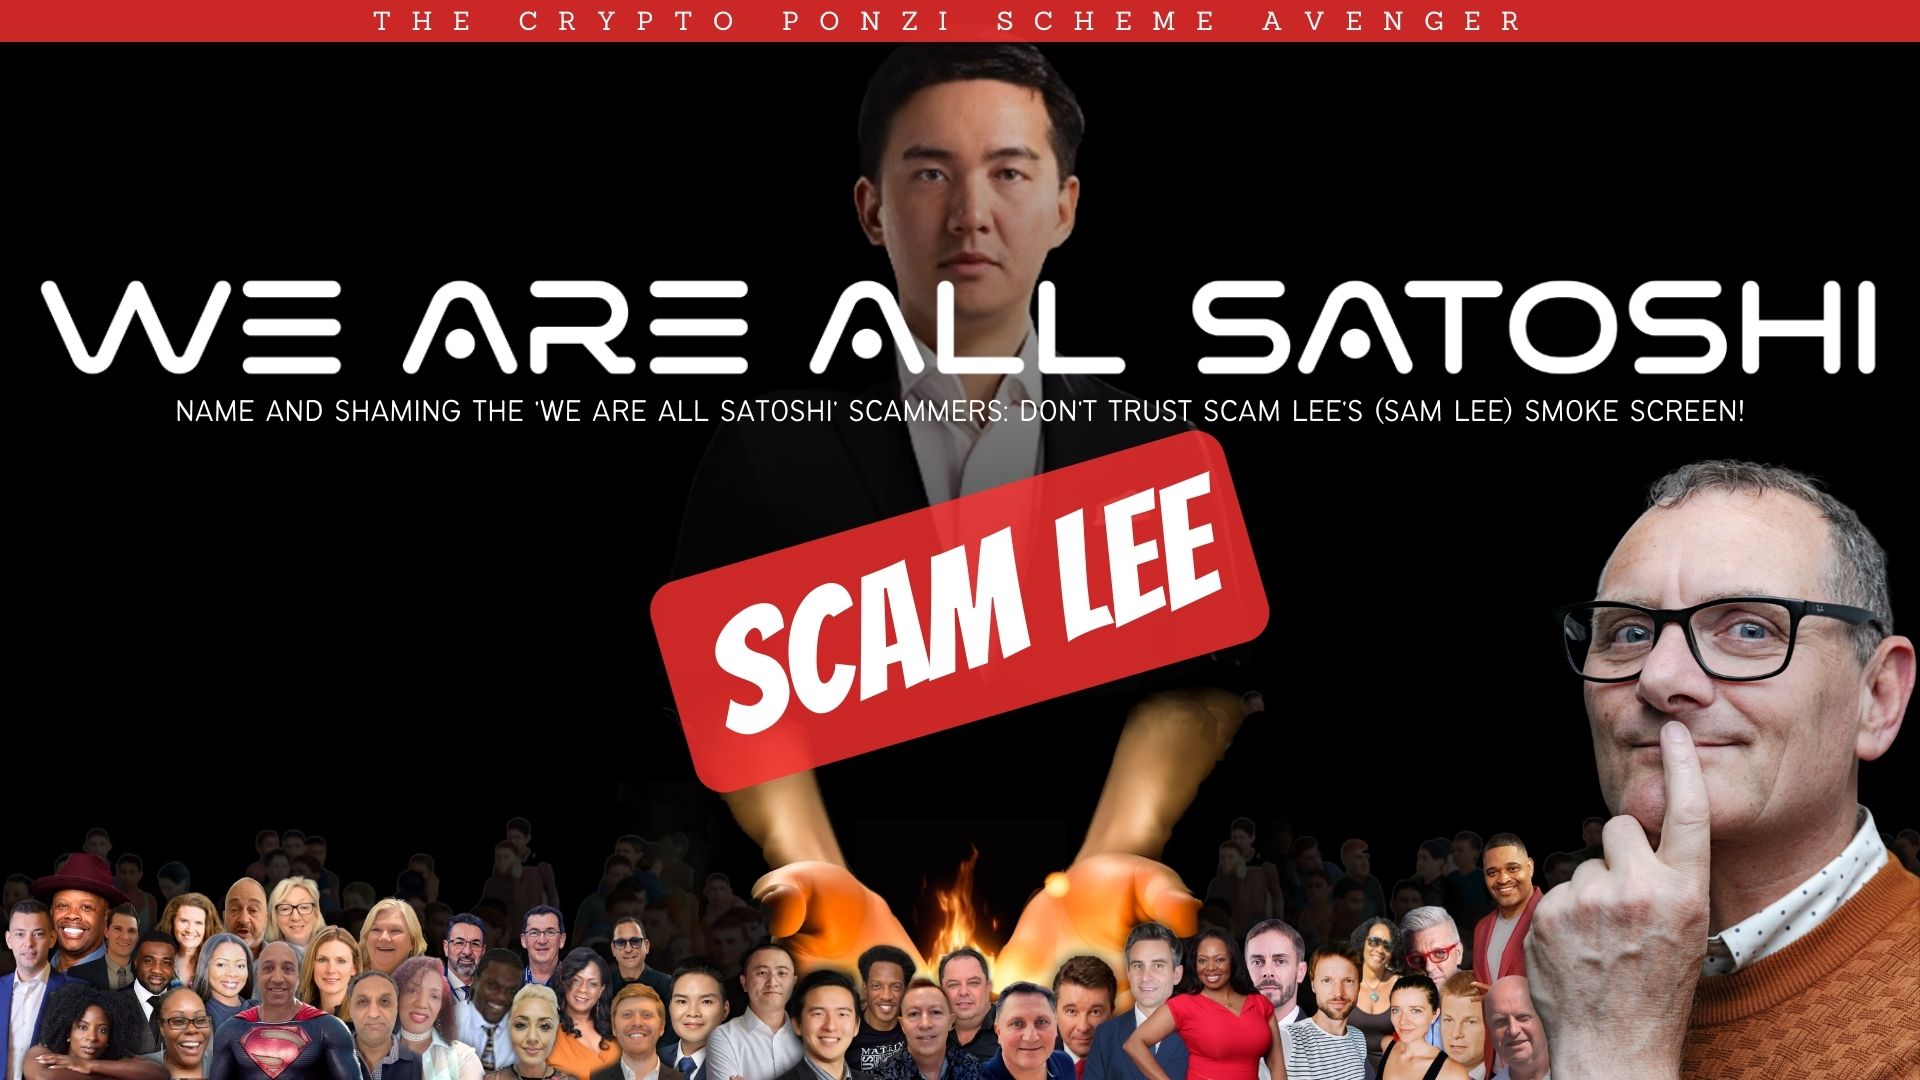 Name and Shaming the 'WE ARE ALL SATOSHI' Scammers: Don't Trust Scam Lee's (Sam Lee) Smoke Screen!